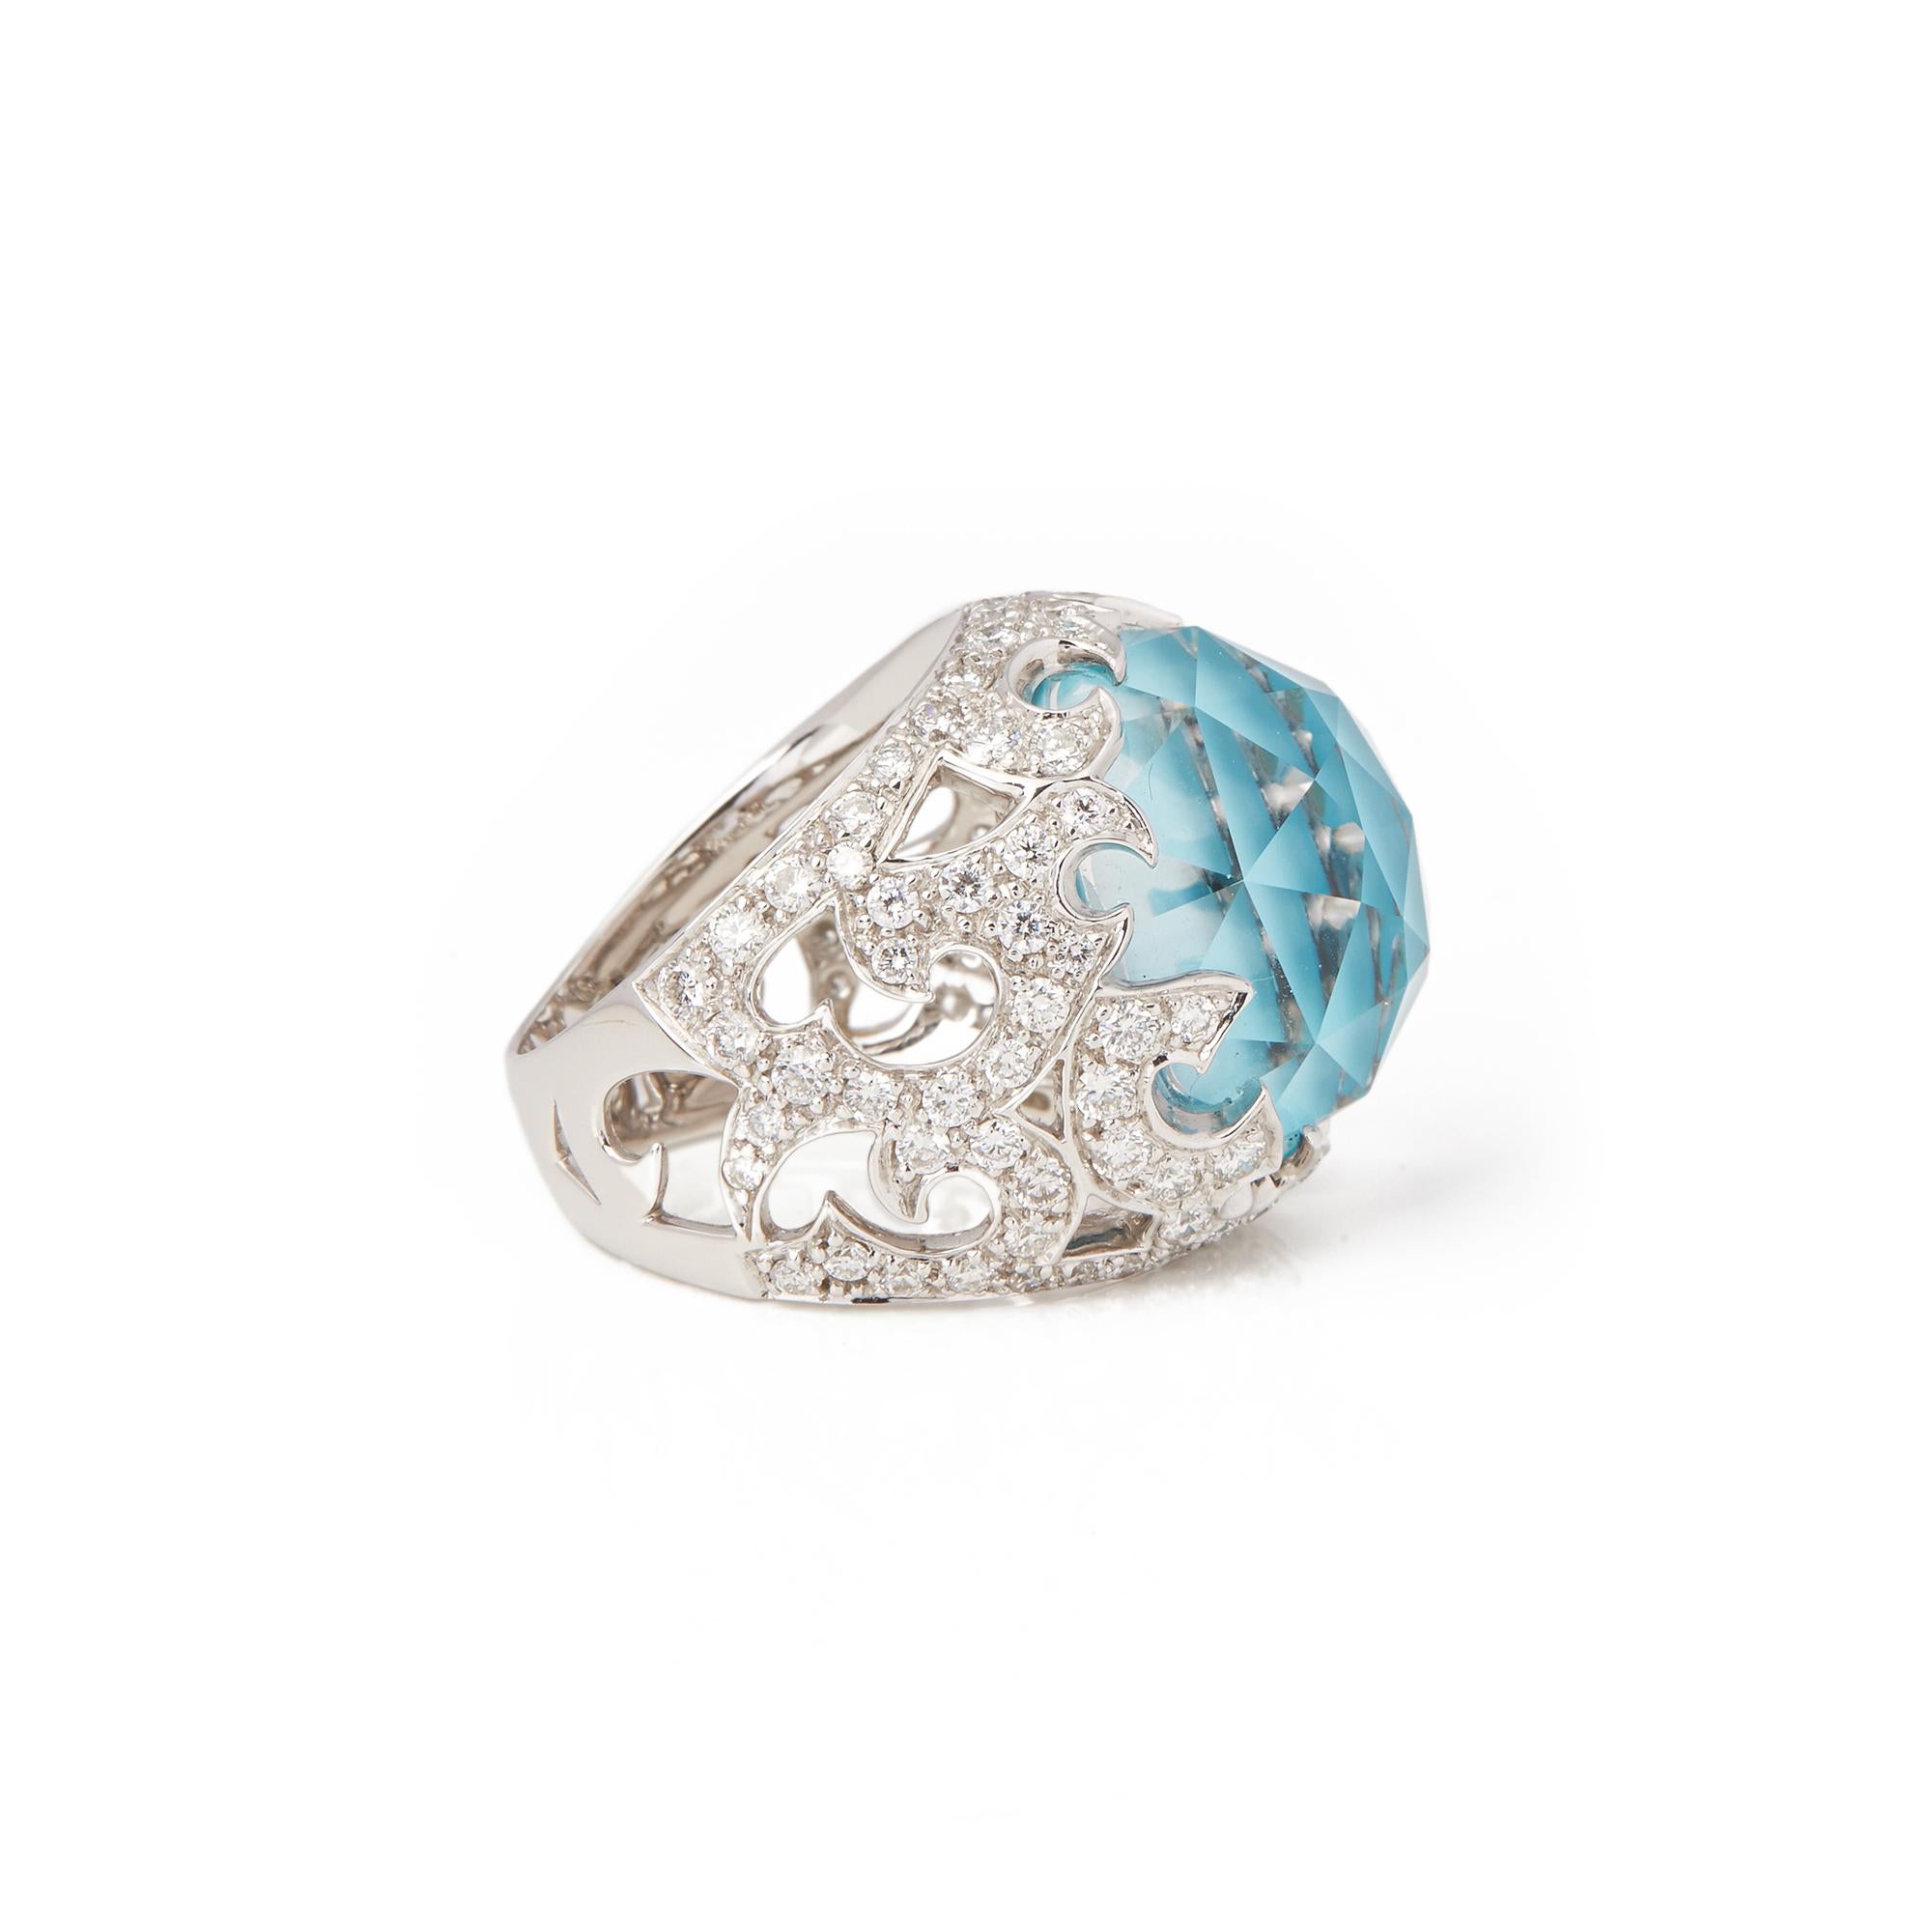 Contemporary Stephen Webster Borneo Lipstick 18ct White Gold Crystal Haze and Diamond Ring 